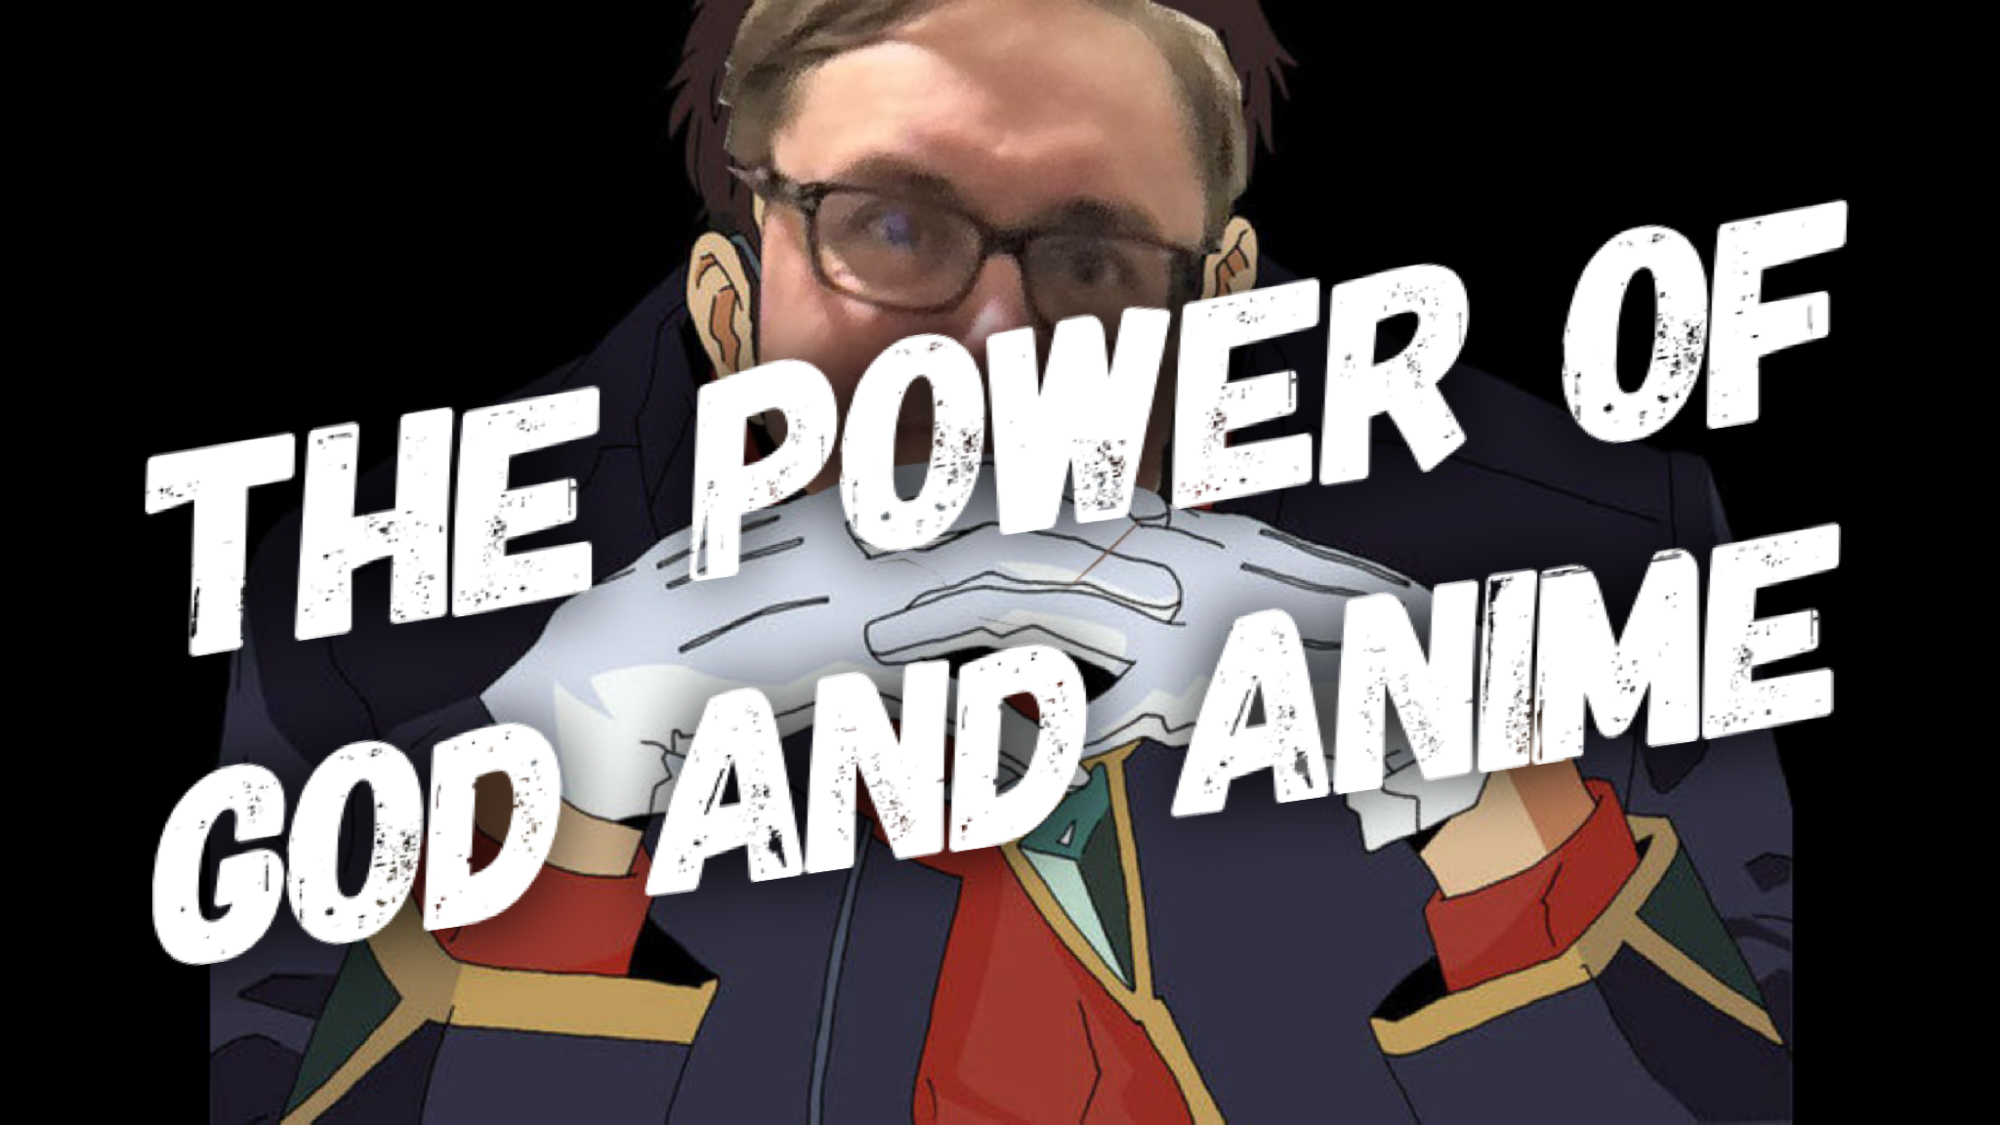 The Power of God and Anime Podcast, Episode 1: Neon Genesis Mikevangelion